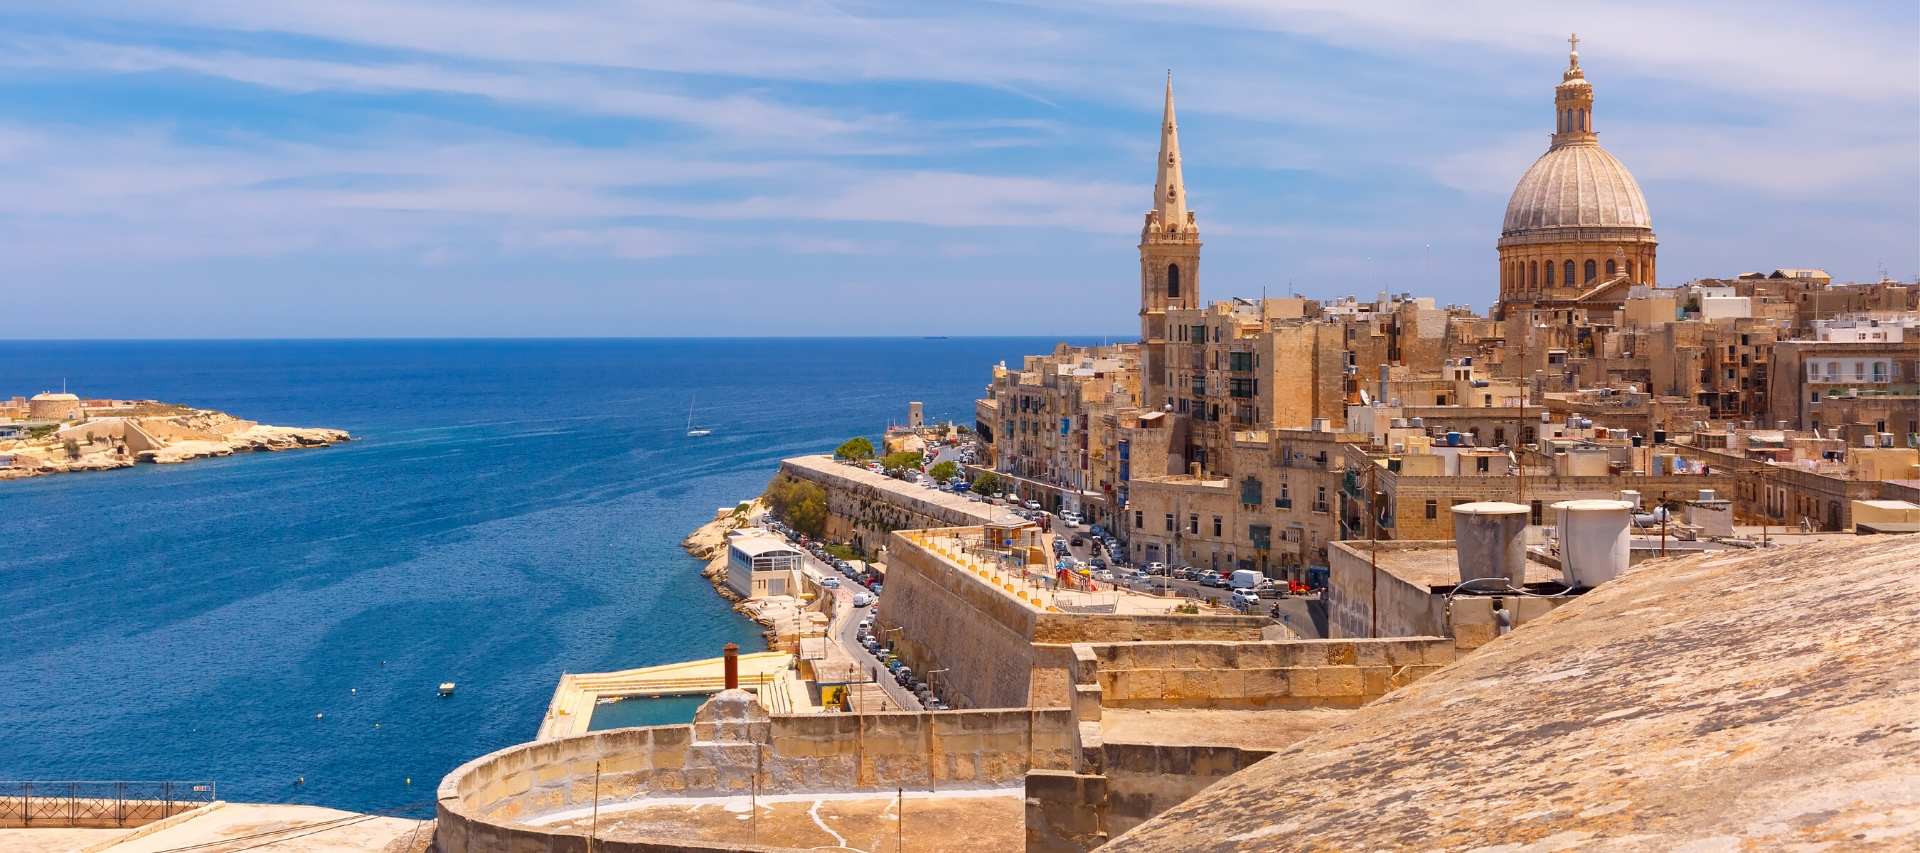 The Best Hotels for Groups in Malta